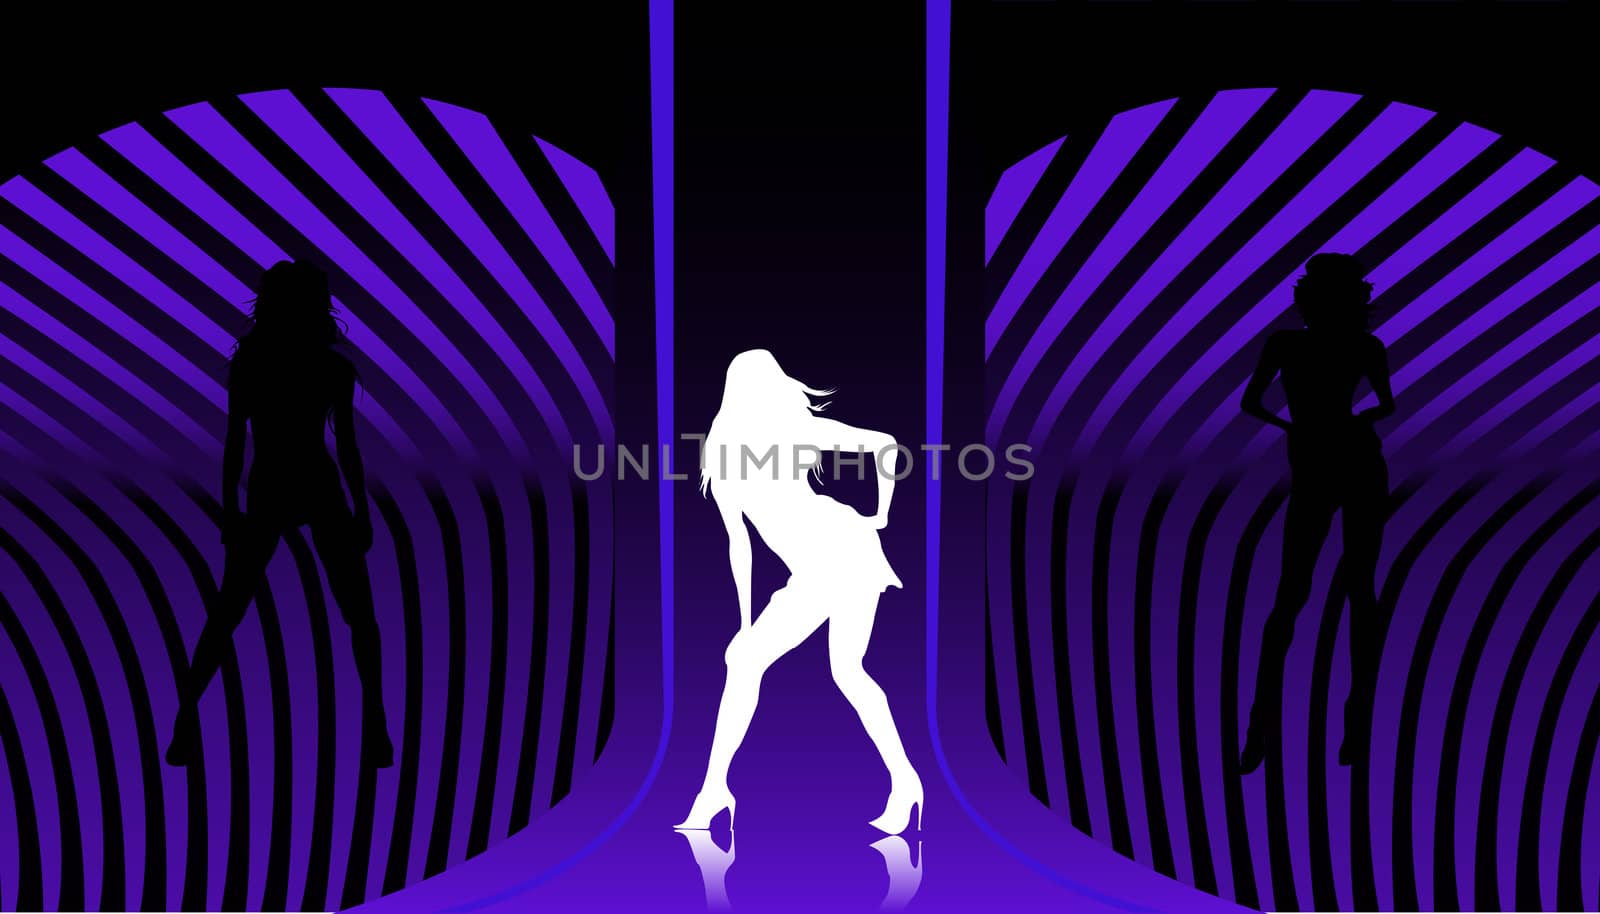 Disco background with dancin silhouettes